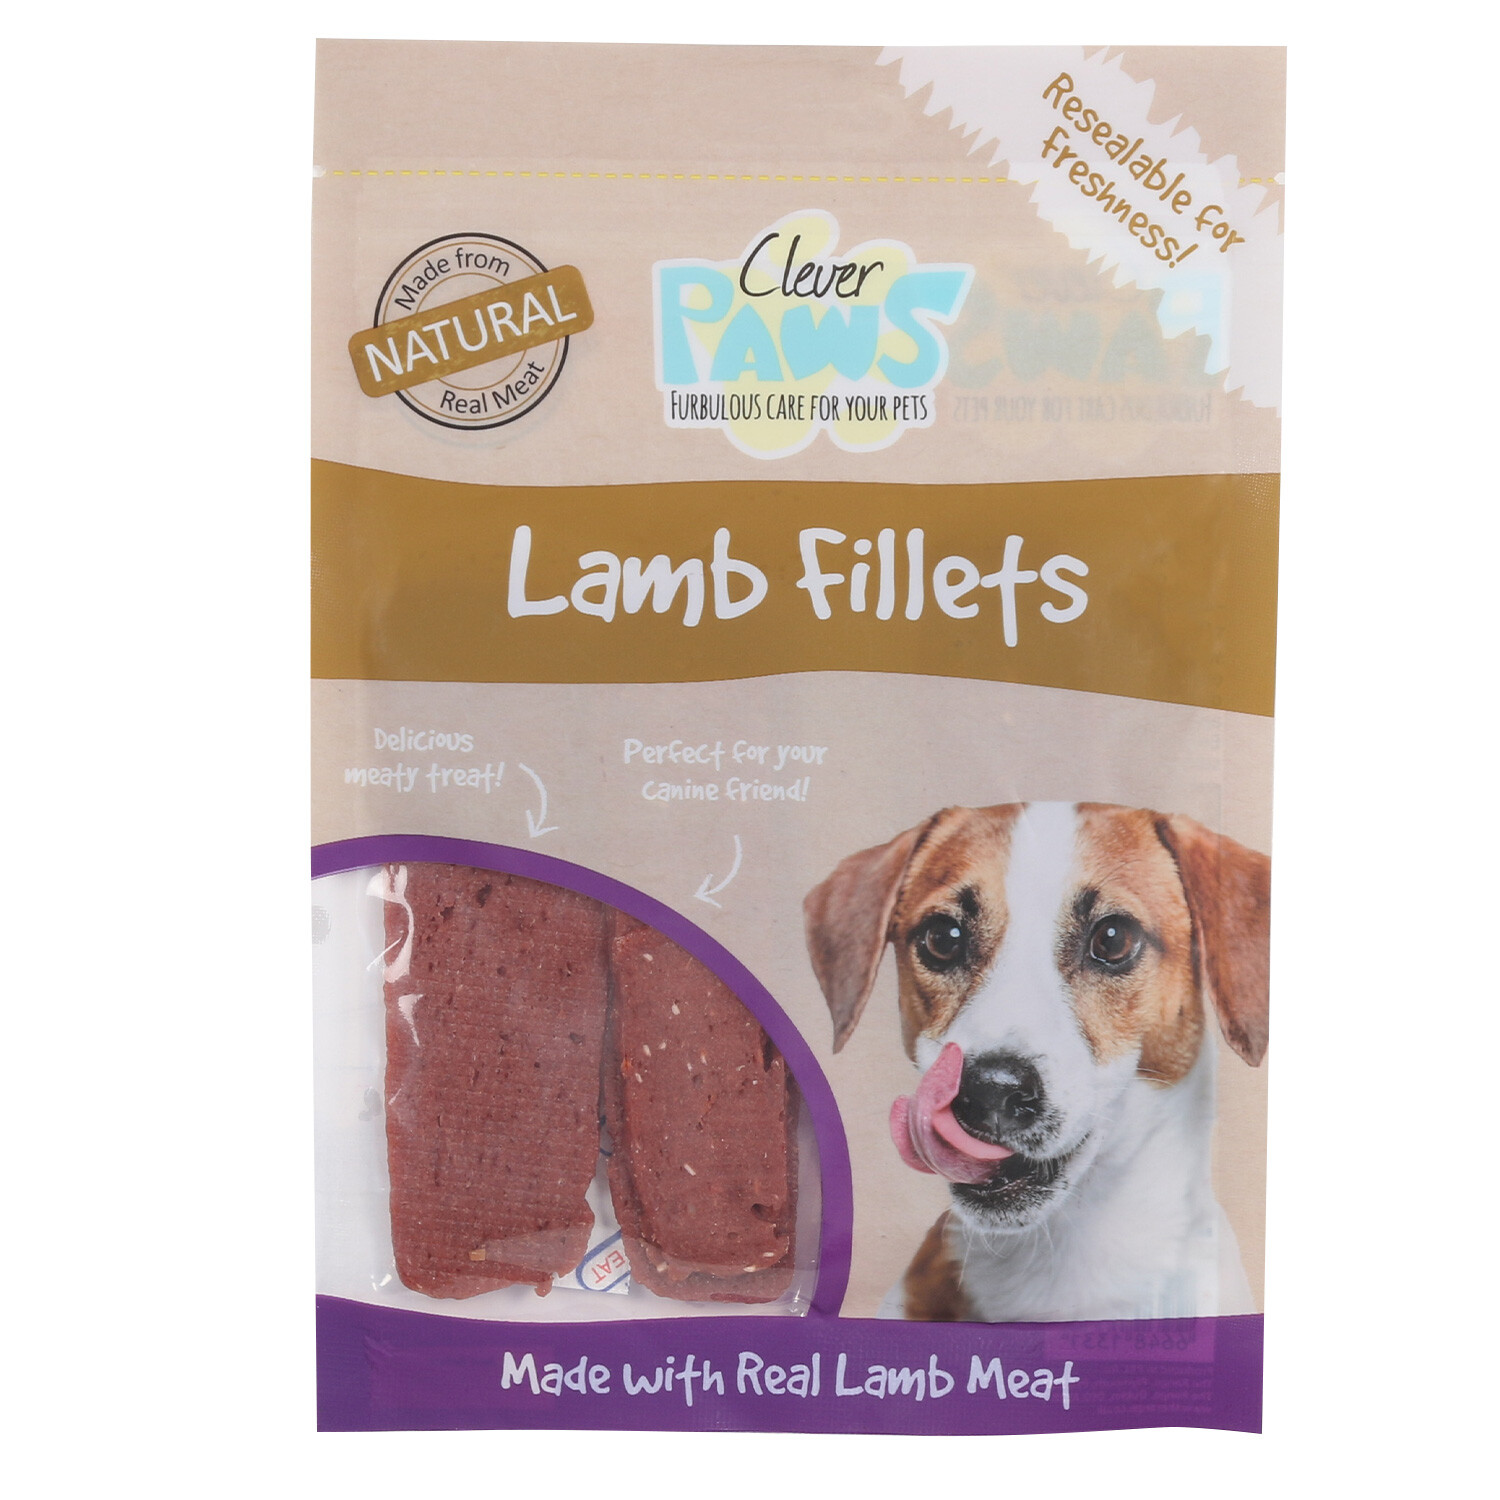 Clever Paws Lamb Fillets Dog Treat 80g Image 1